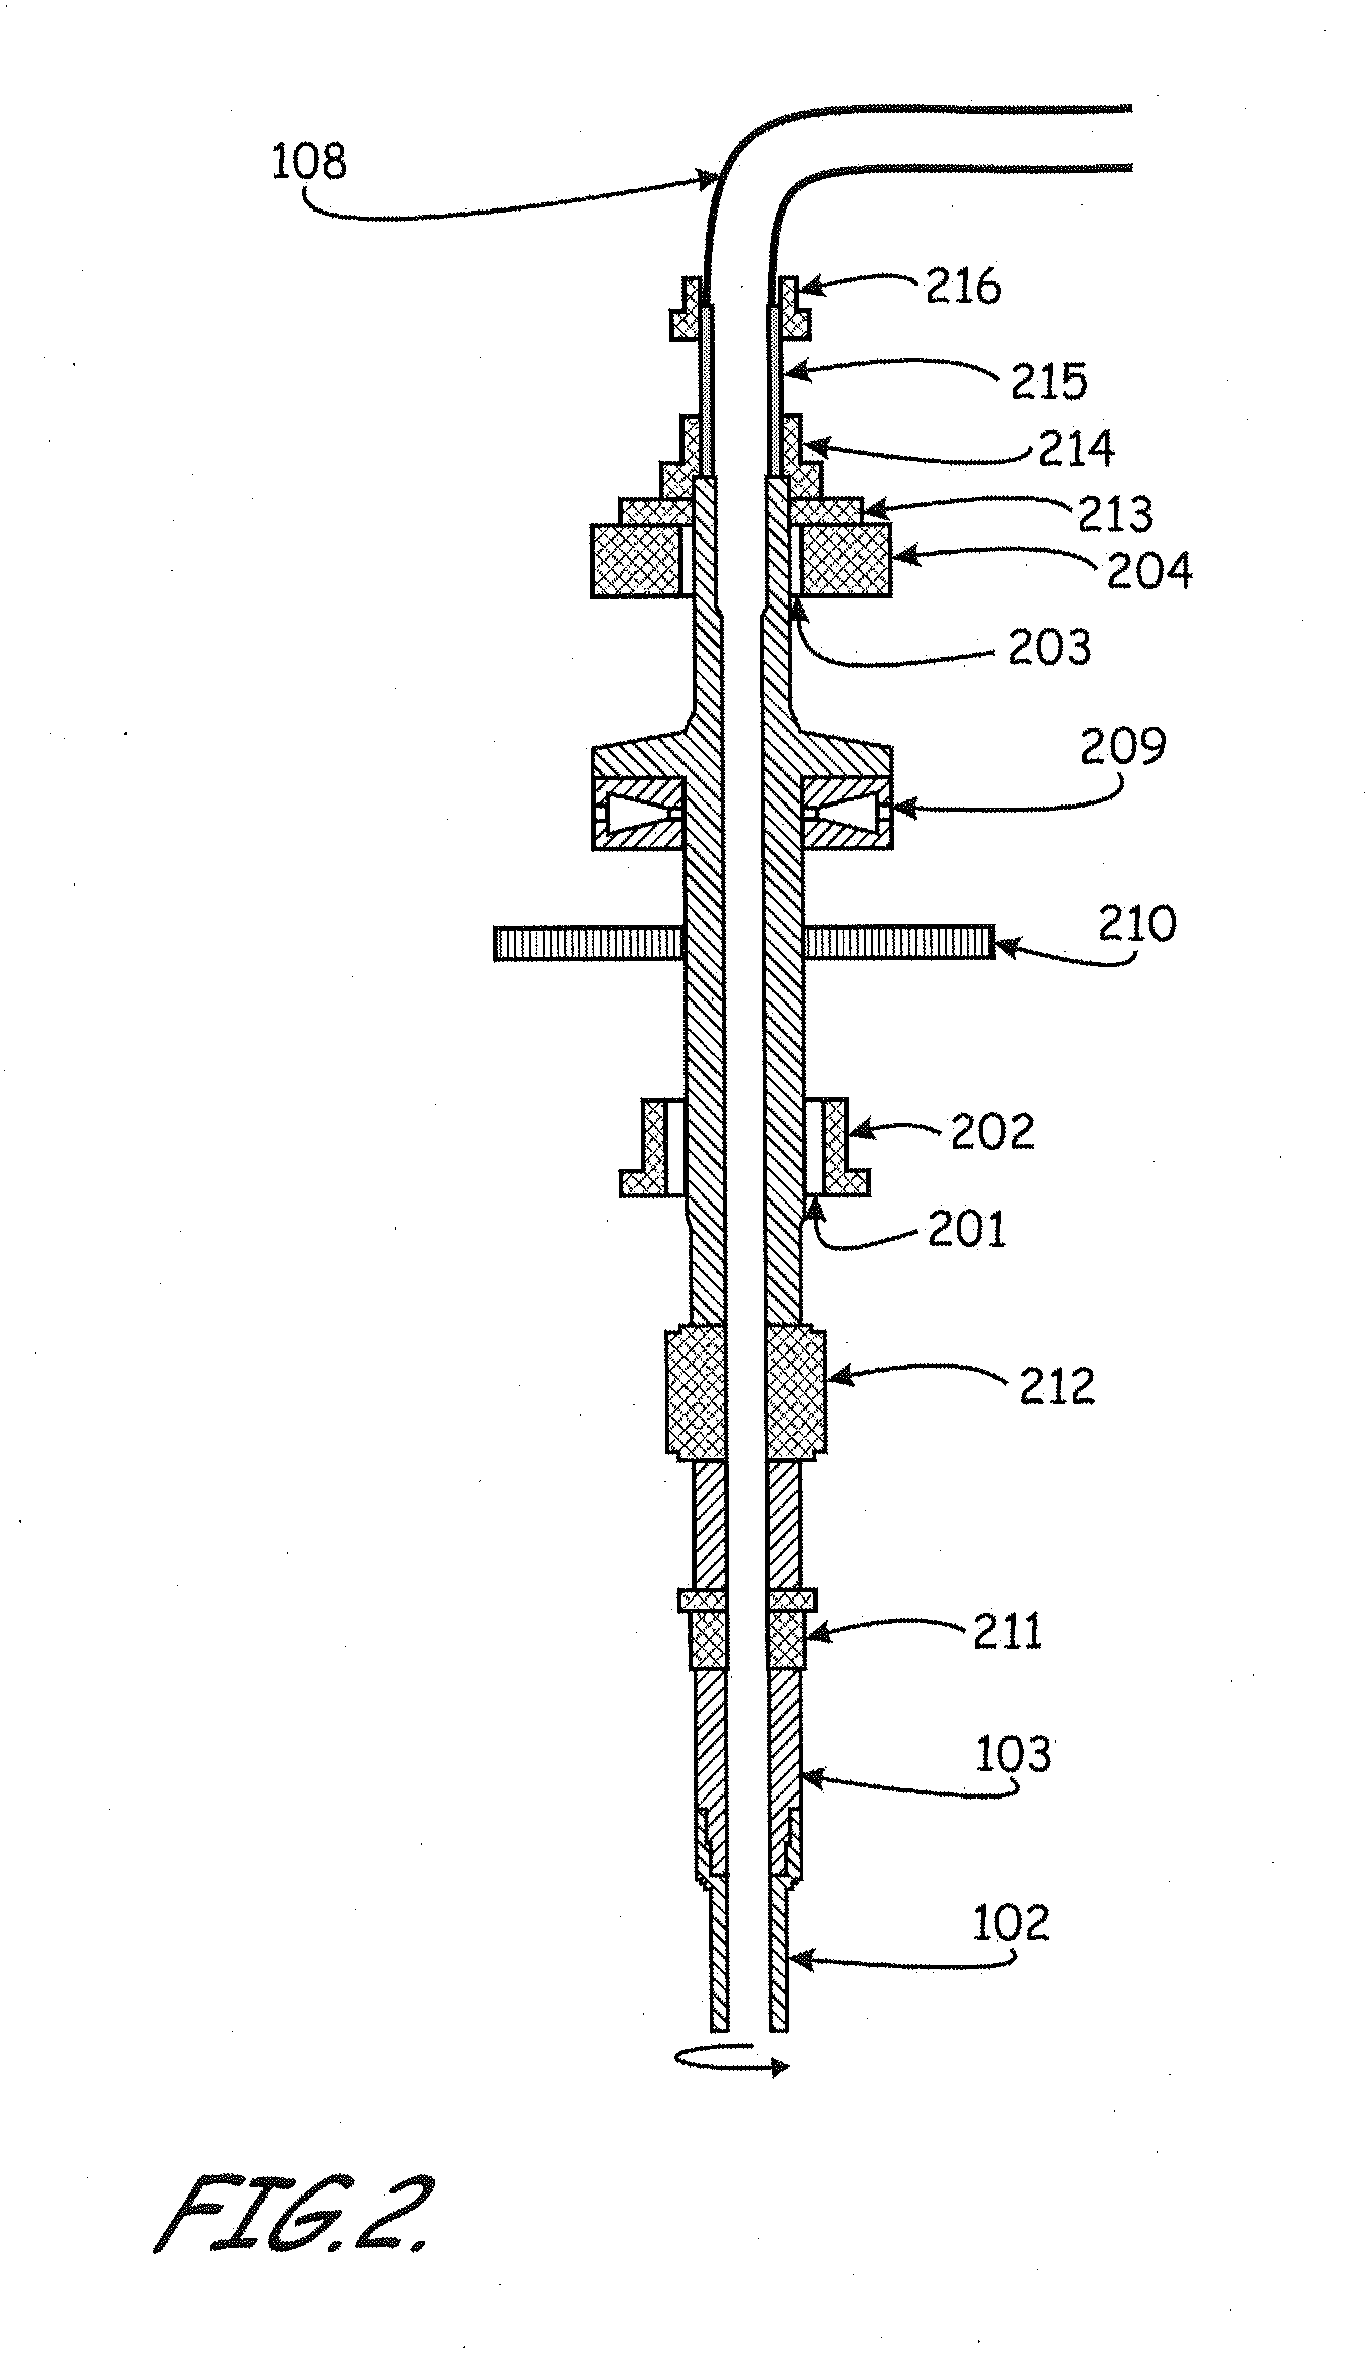 Apparatus for evaluating rock properties while drilling using drilling rig-mounted acoustic sensors